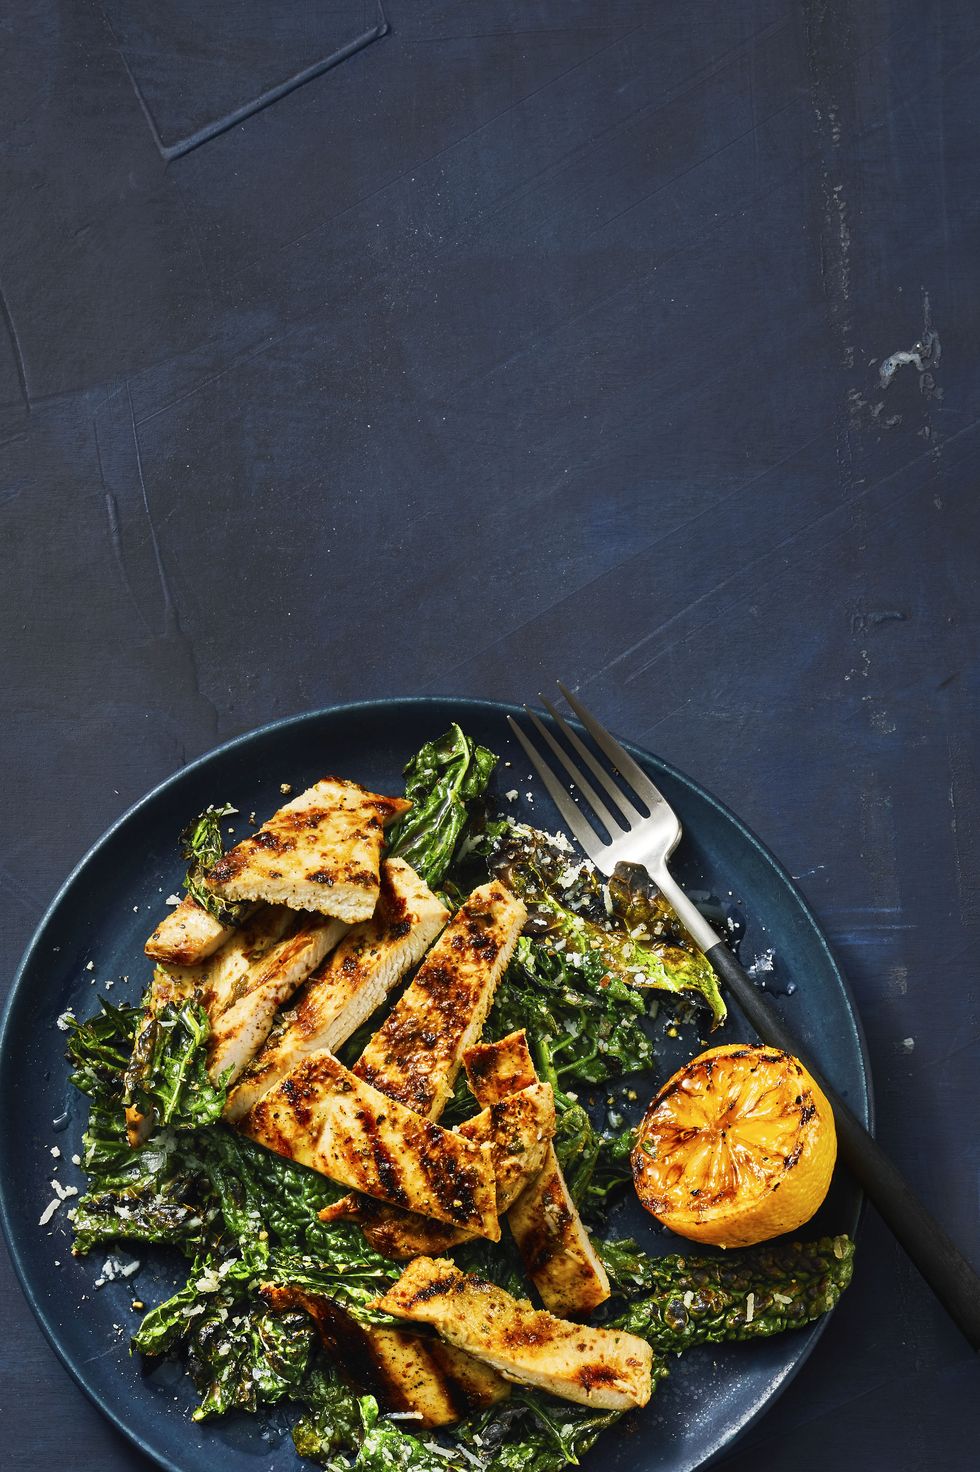 grilled lemony chicken and kale on a dark blue plate with a grilled lemon served on the side